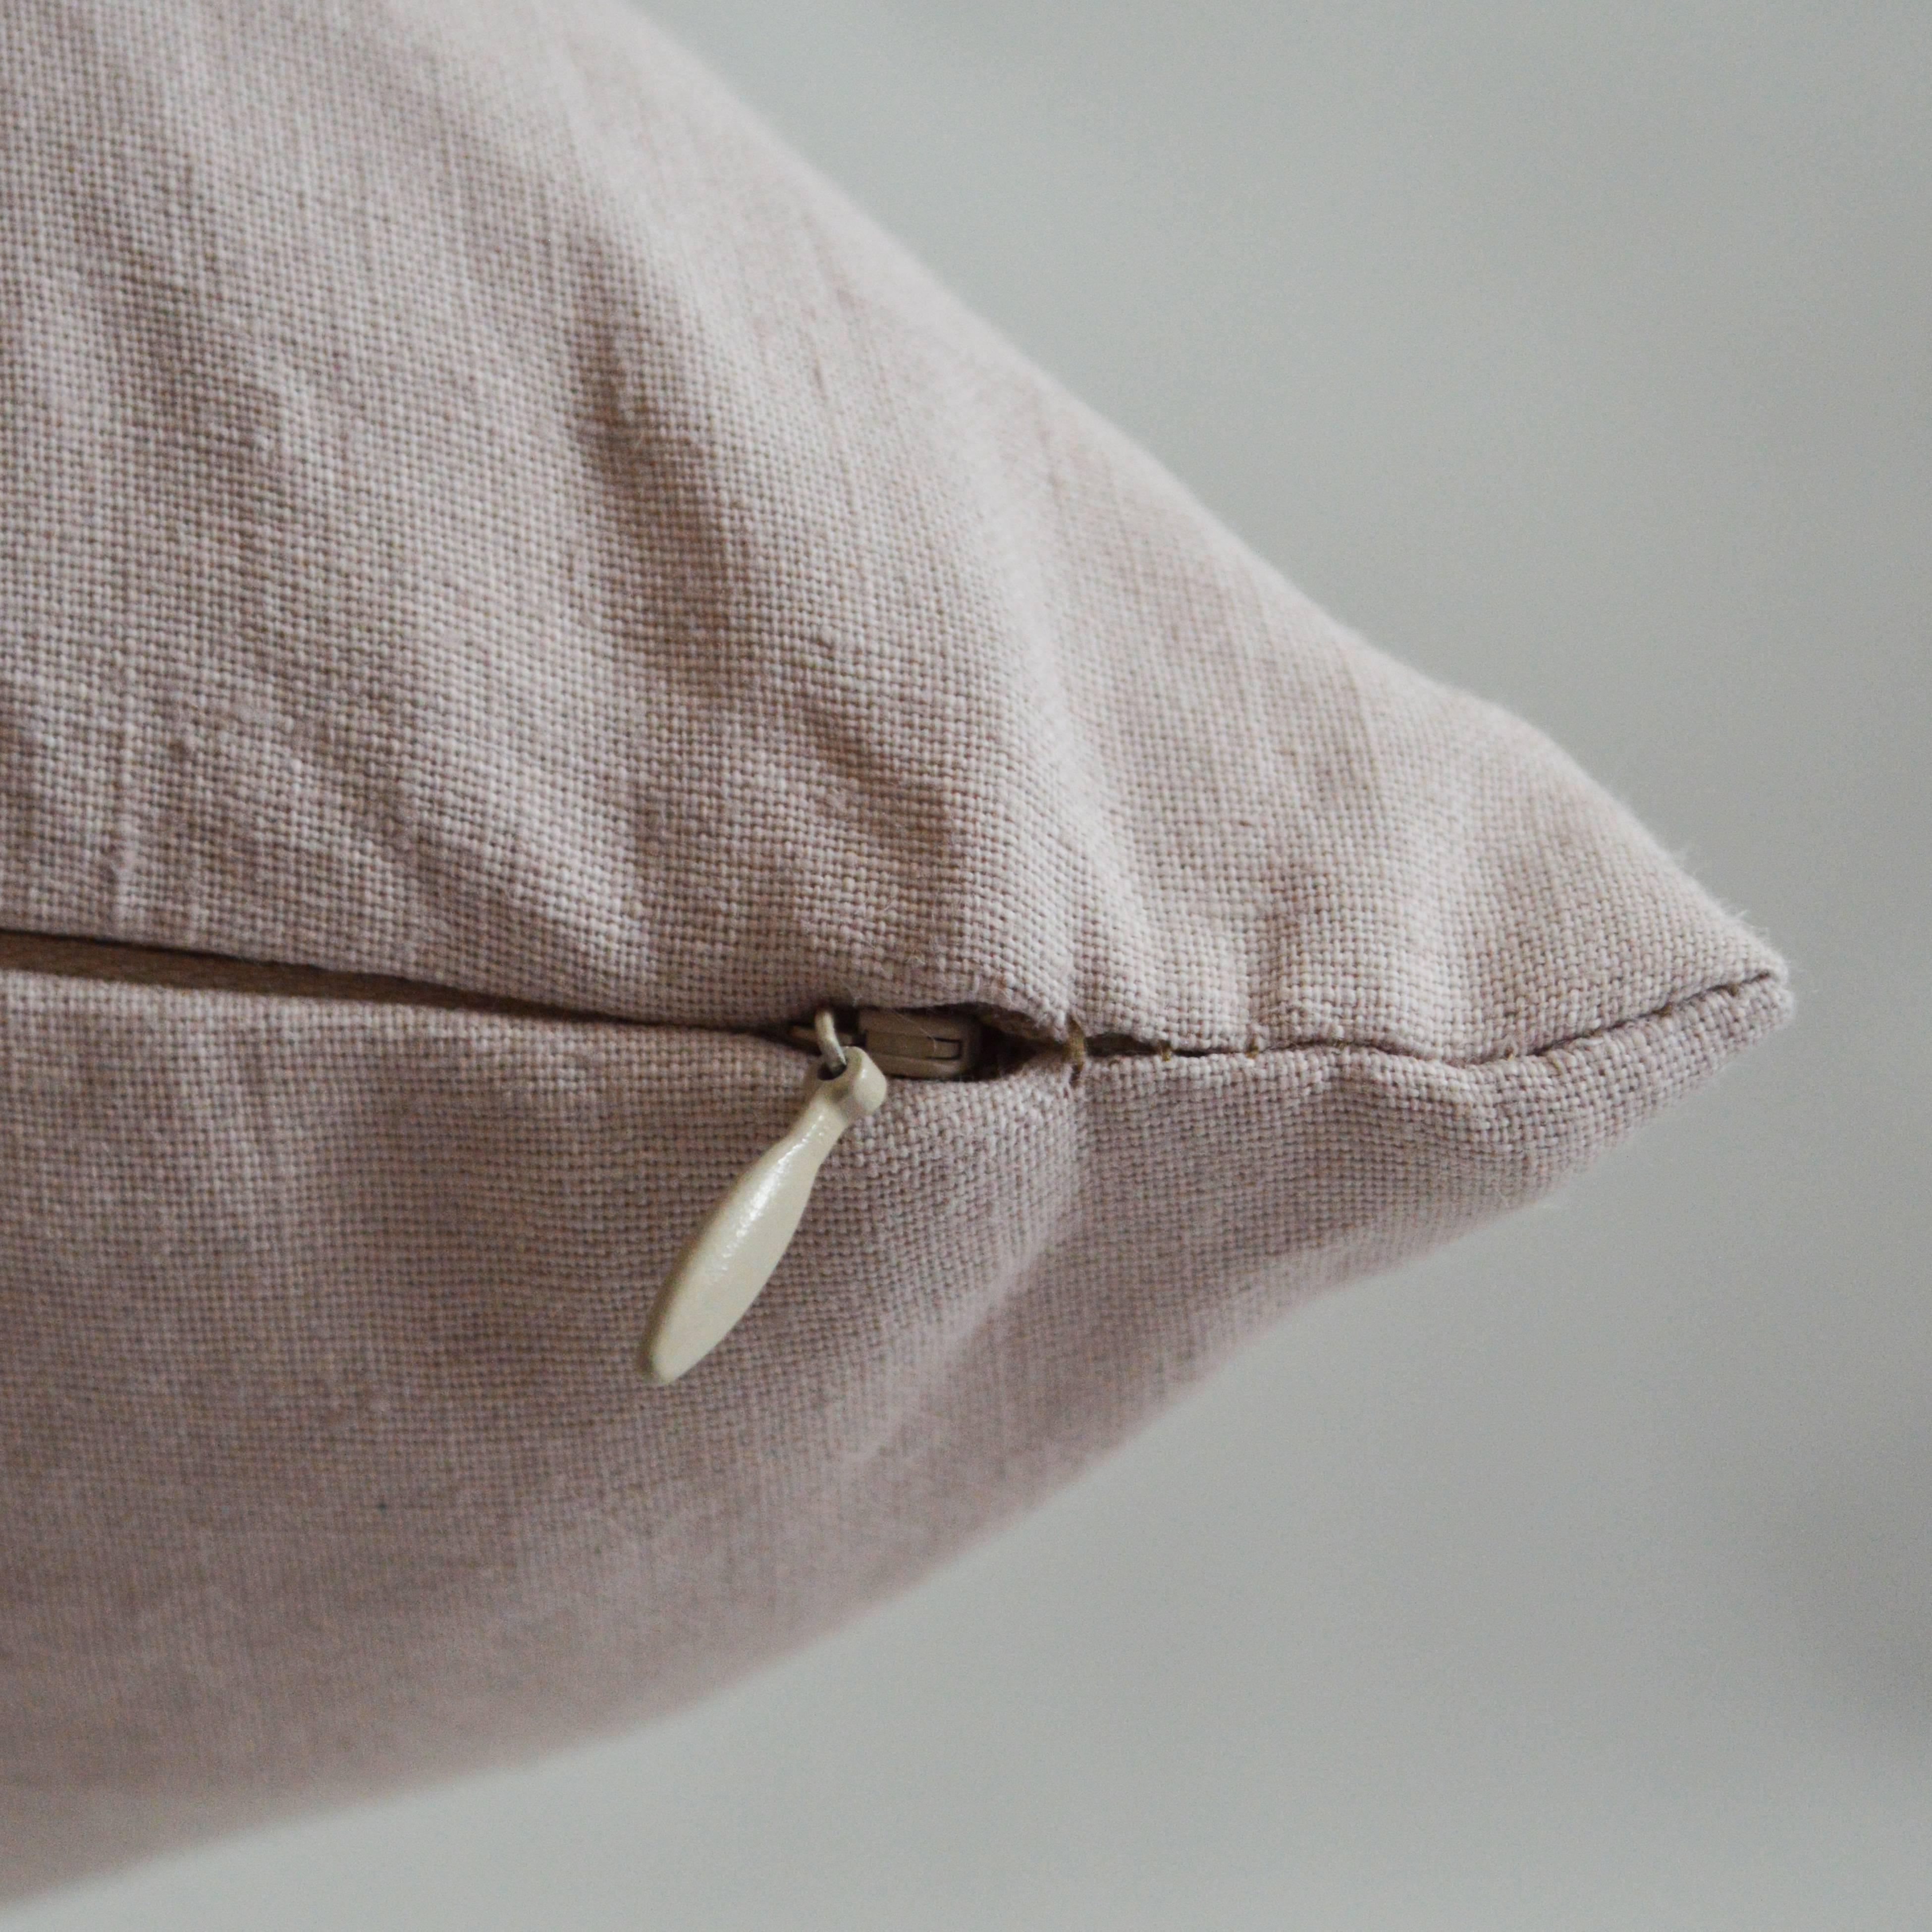 Unique Contemporary Double-Sided Stitch in Pink Mauve Handmade Linen Pillow In Excellent Condition For Sale In Merriam, KS